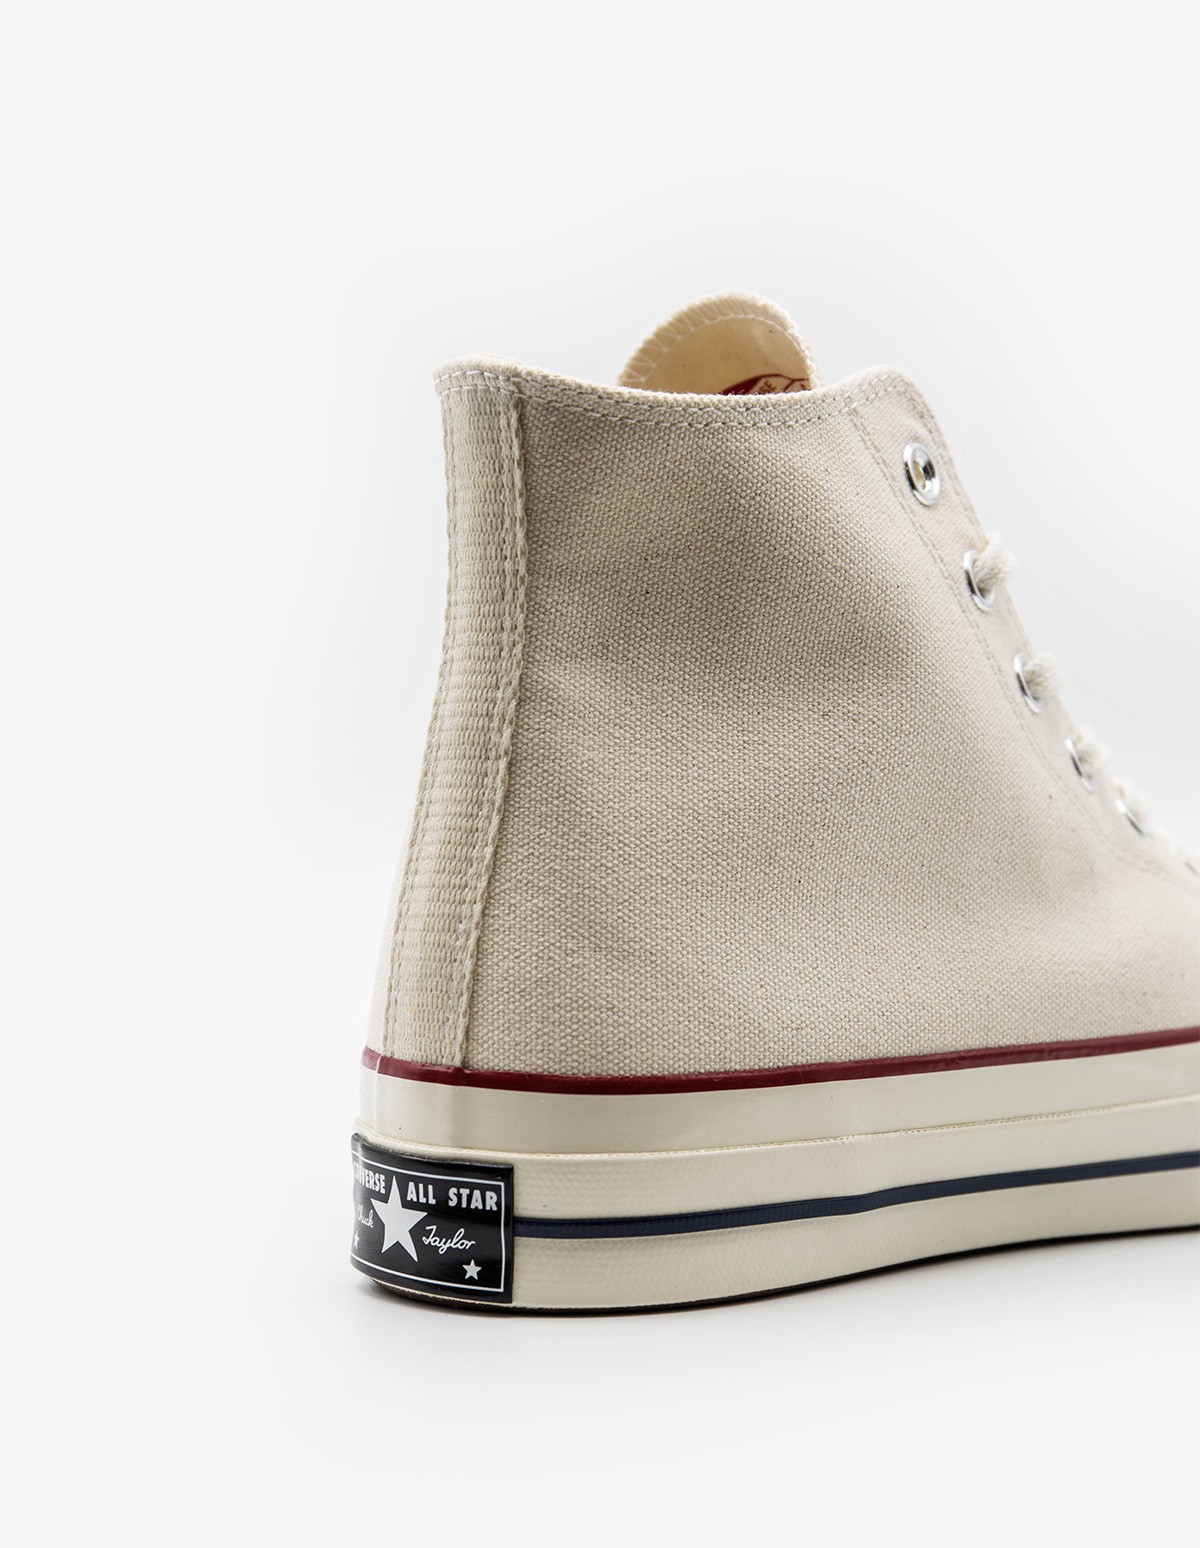 Converse Chuck Taylor High All Star '70 in Parchment Sand 